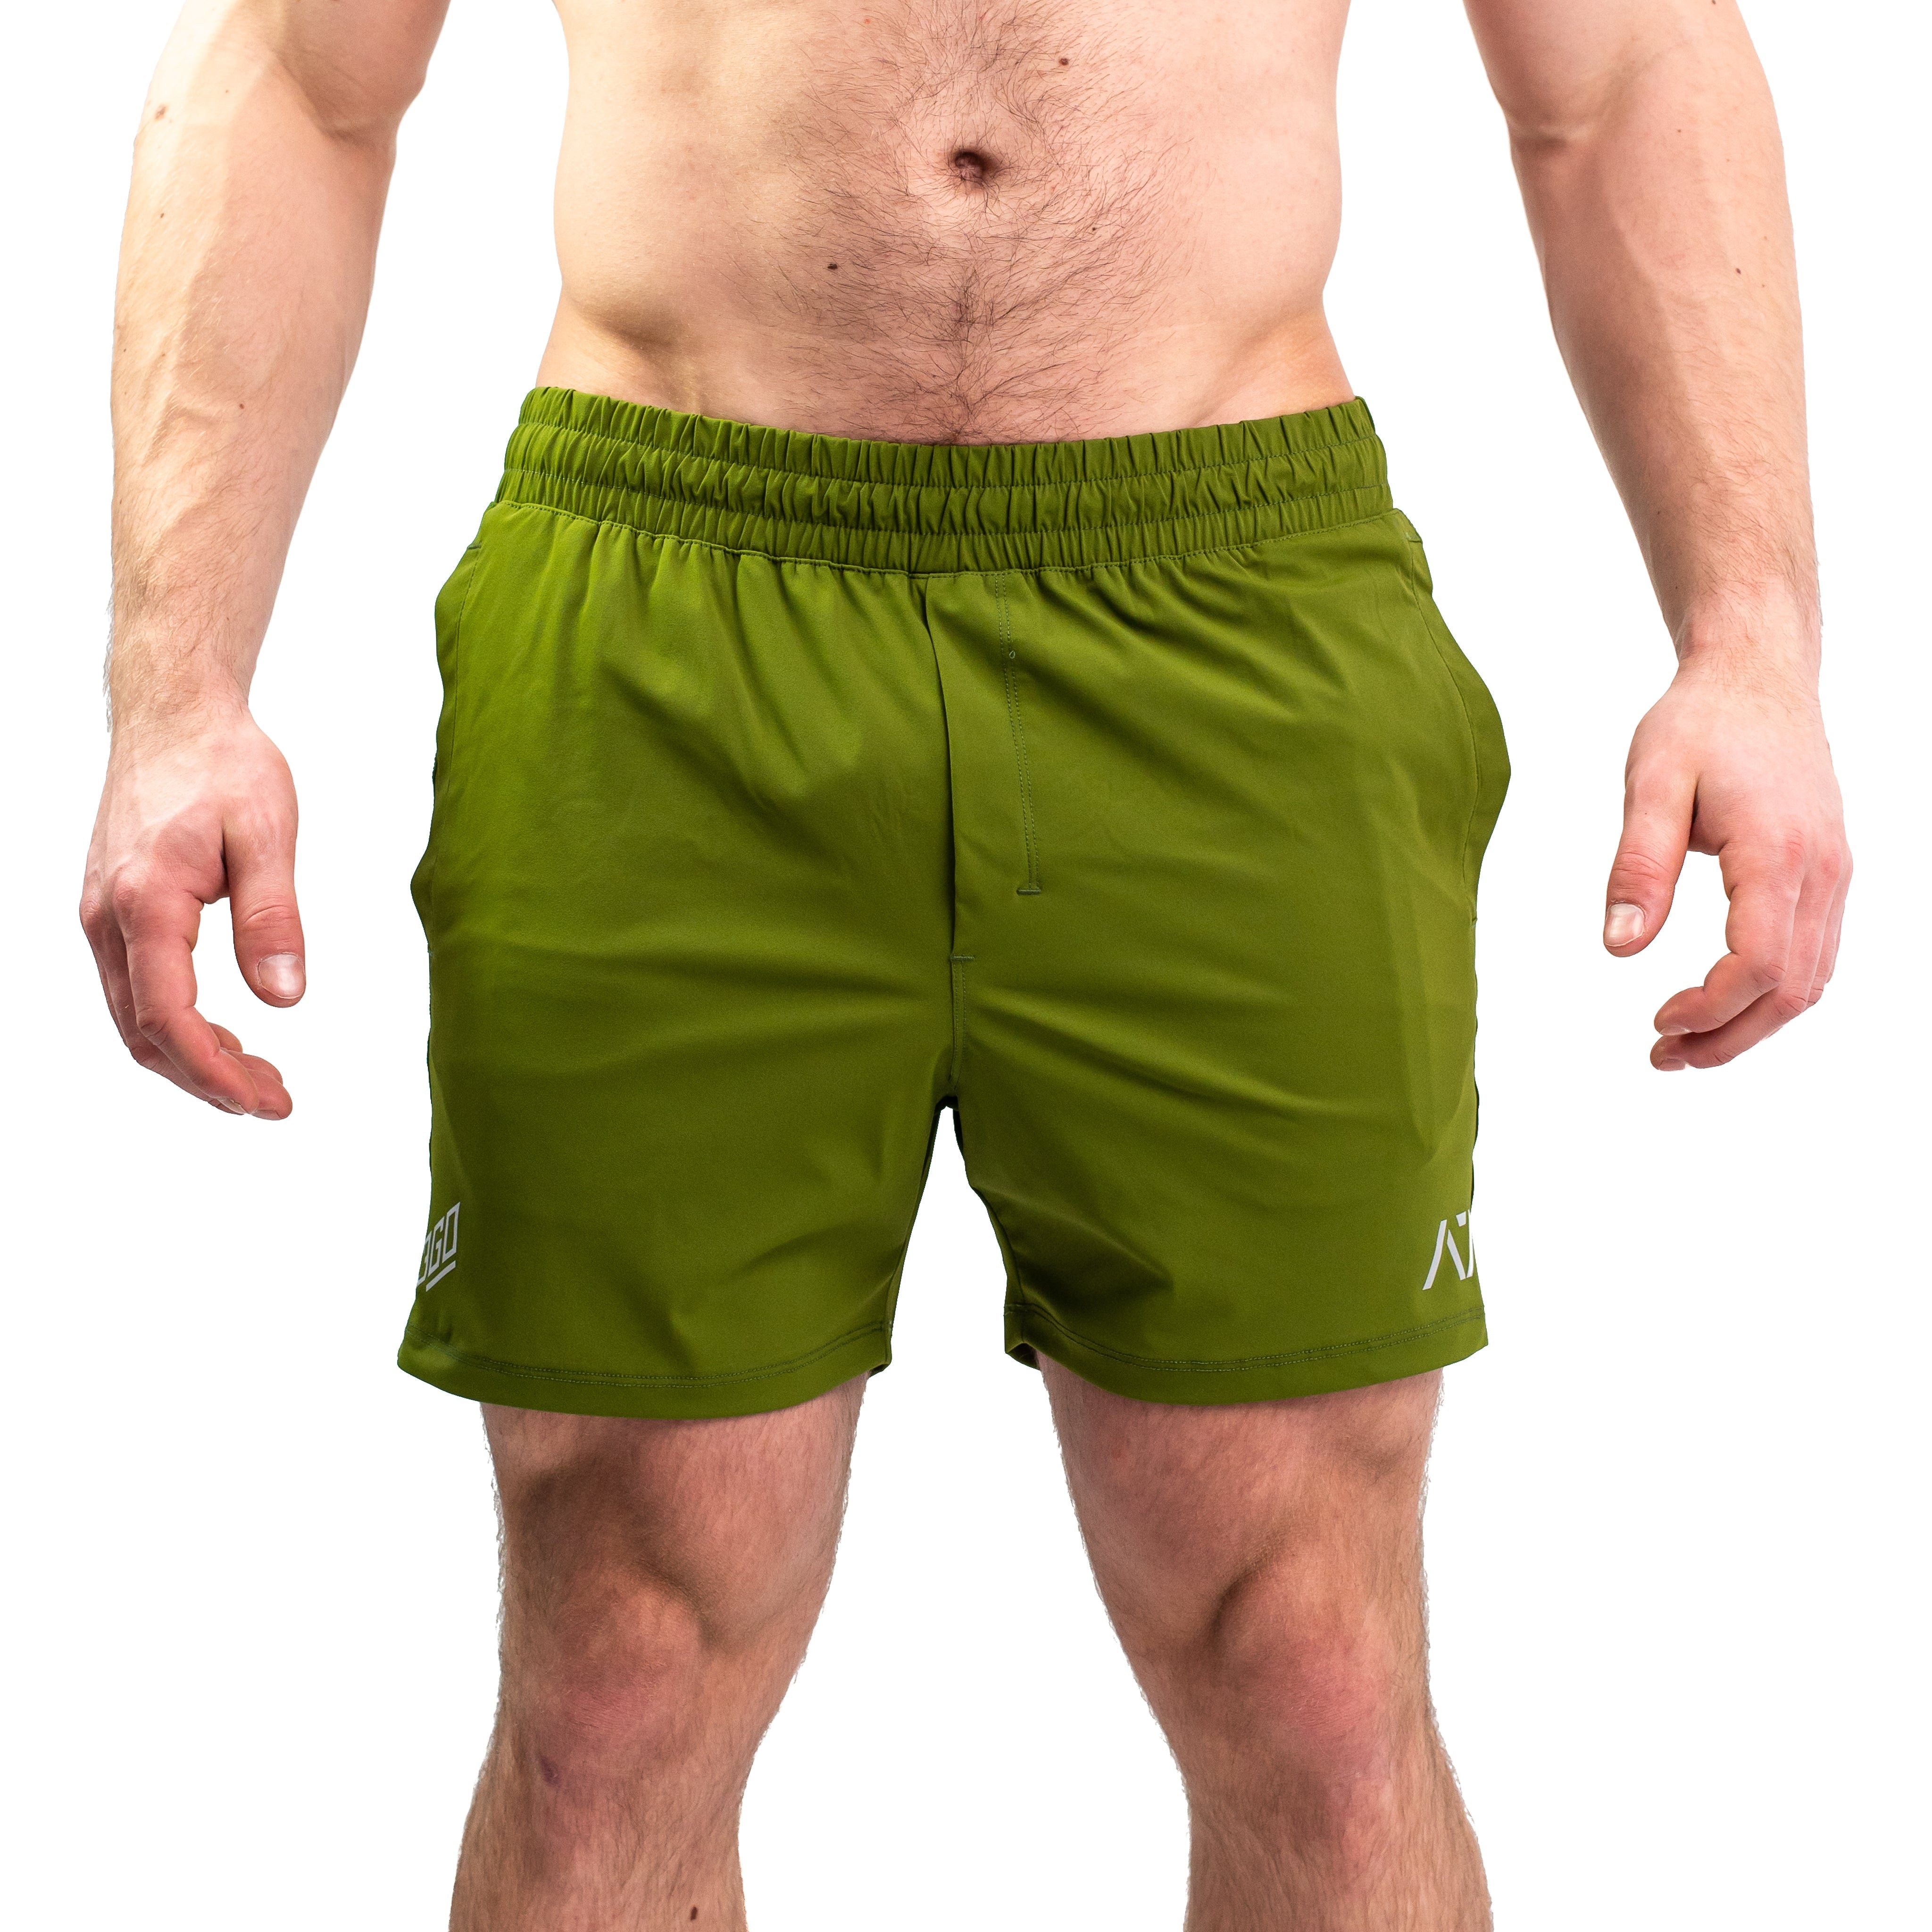 With the 360 degrees stretch of these 360GO KWD Shorts, you are sure to find a pair that will become your own whether in the gym, going on a hike, out on the town, or even just hanging around the house. We decided on a green that reflects a green that reminds us of the depth of the woods, the green moss on the trees, a calm comfort that still packs a punch when worn by our military.